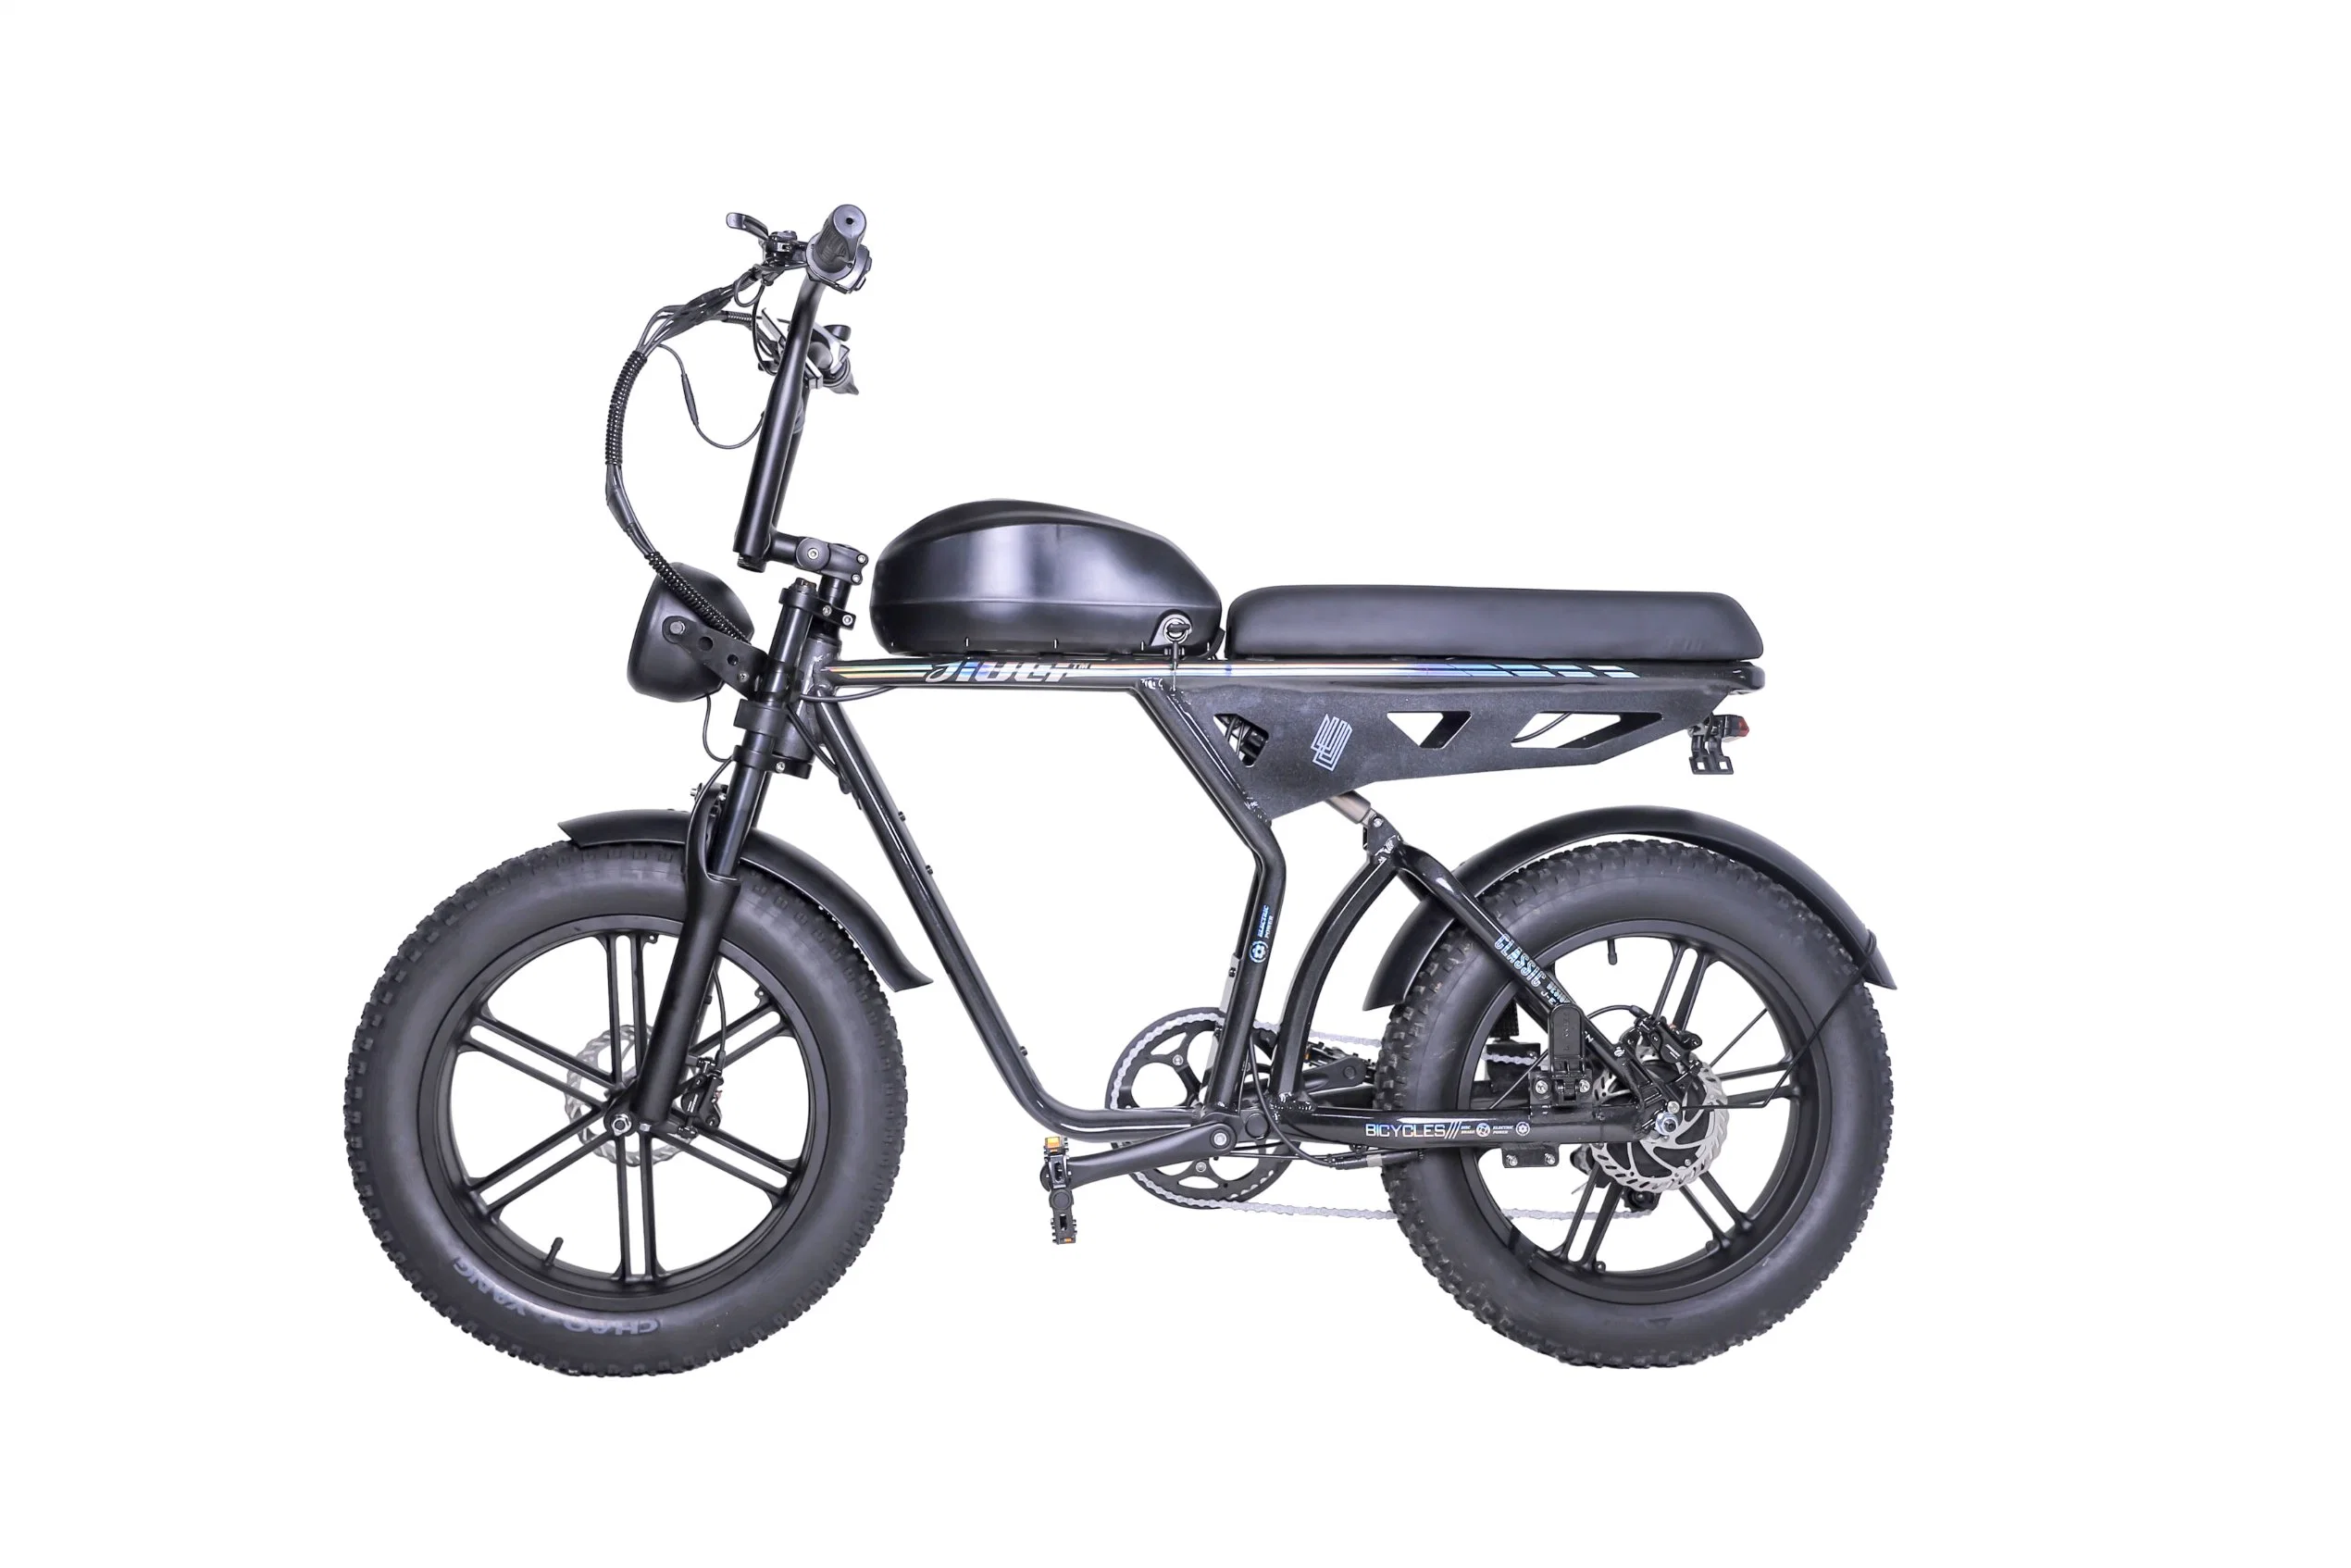 20*4.0 Fat Tire Male Mountain and Commuting Aluminium Frame Electric Bike E-Bicycle Ebike Dual Motor Available in Stock in The United States, Including Shipping